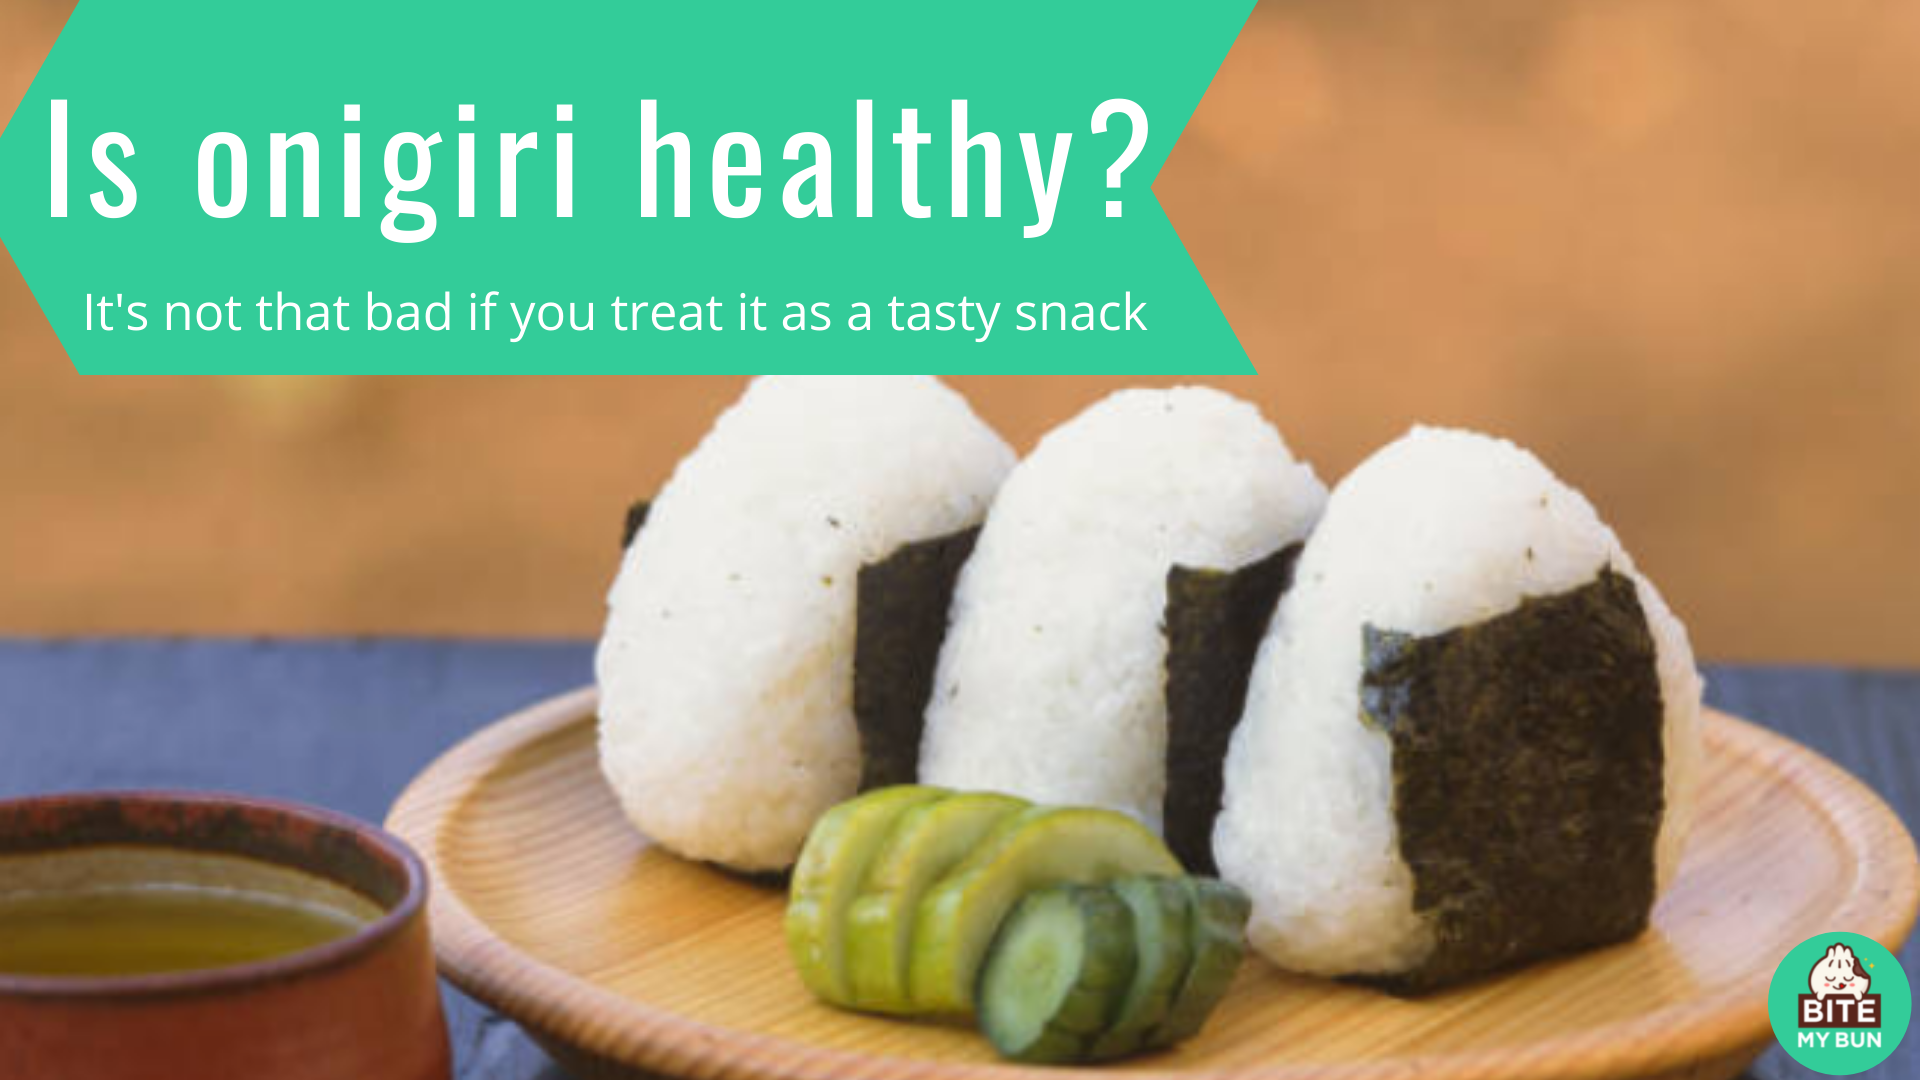 Is onigiri healthy? It's not that bad if you treat it as a tasty snack